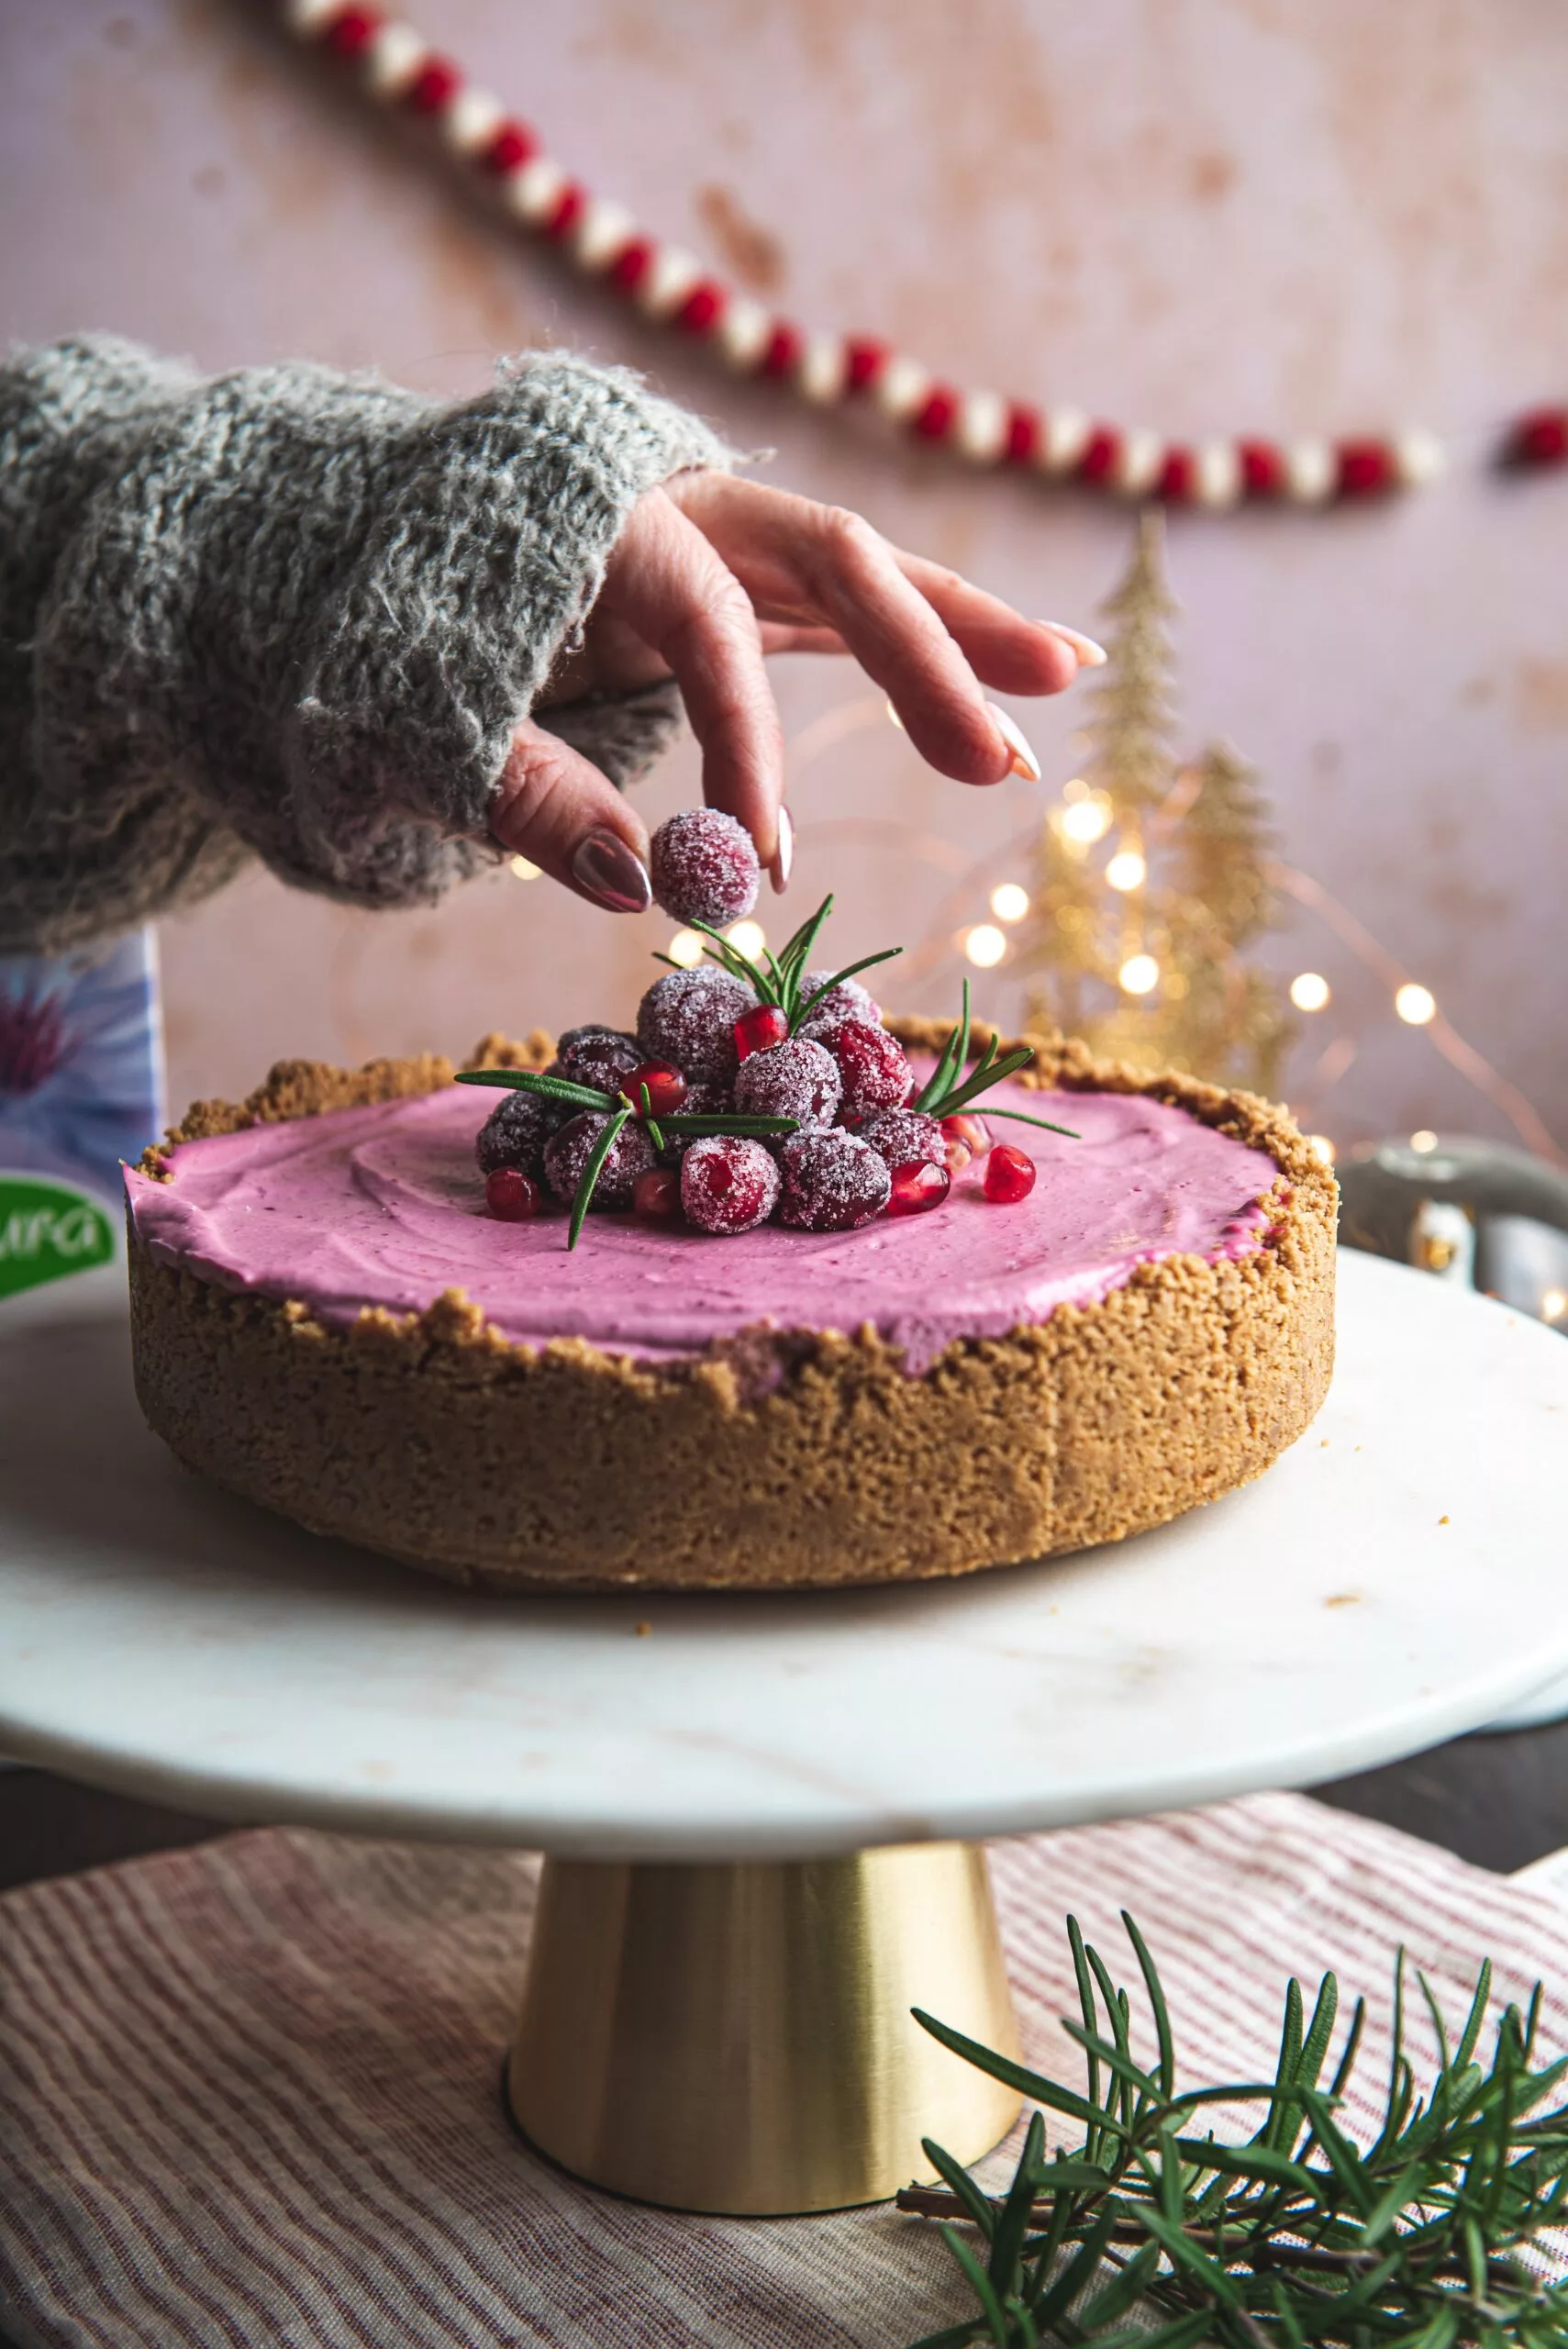 pink cheesecake with sugared cranberries and festive decorations. person placing sugared berry on top of cake